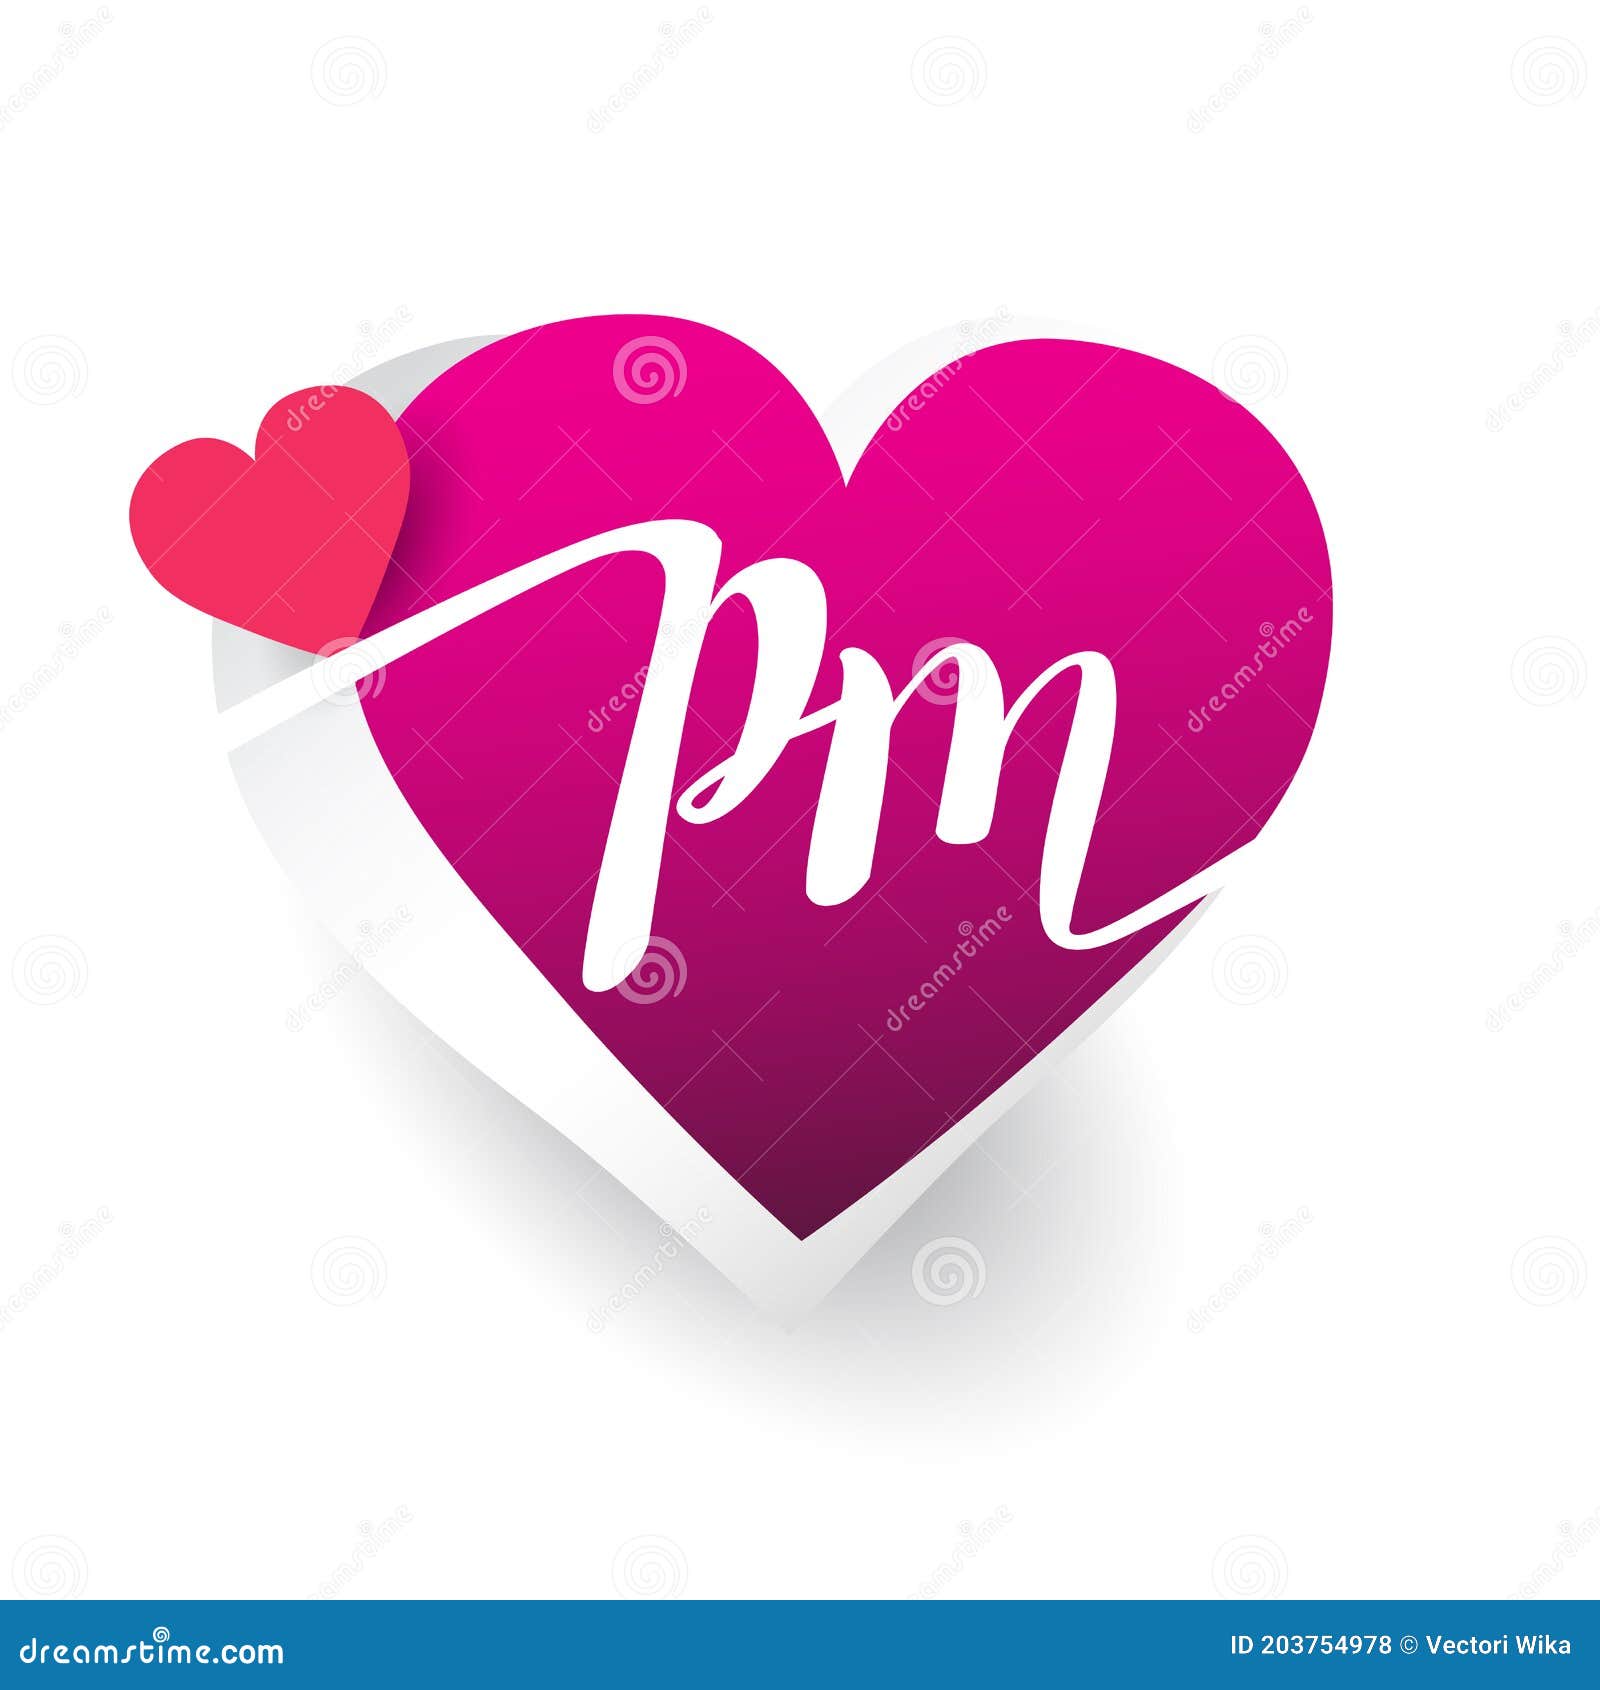 Initial Logo Letter PM with Heart Shape Red Colored, Logo Design